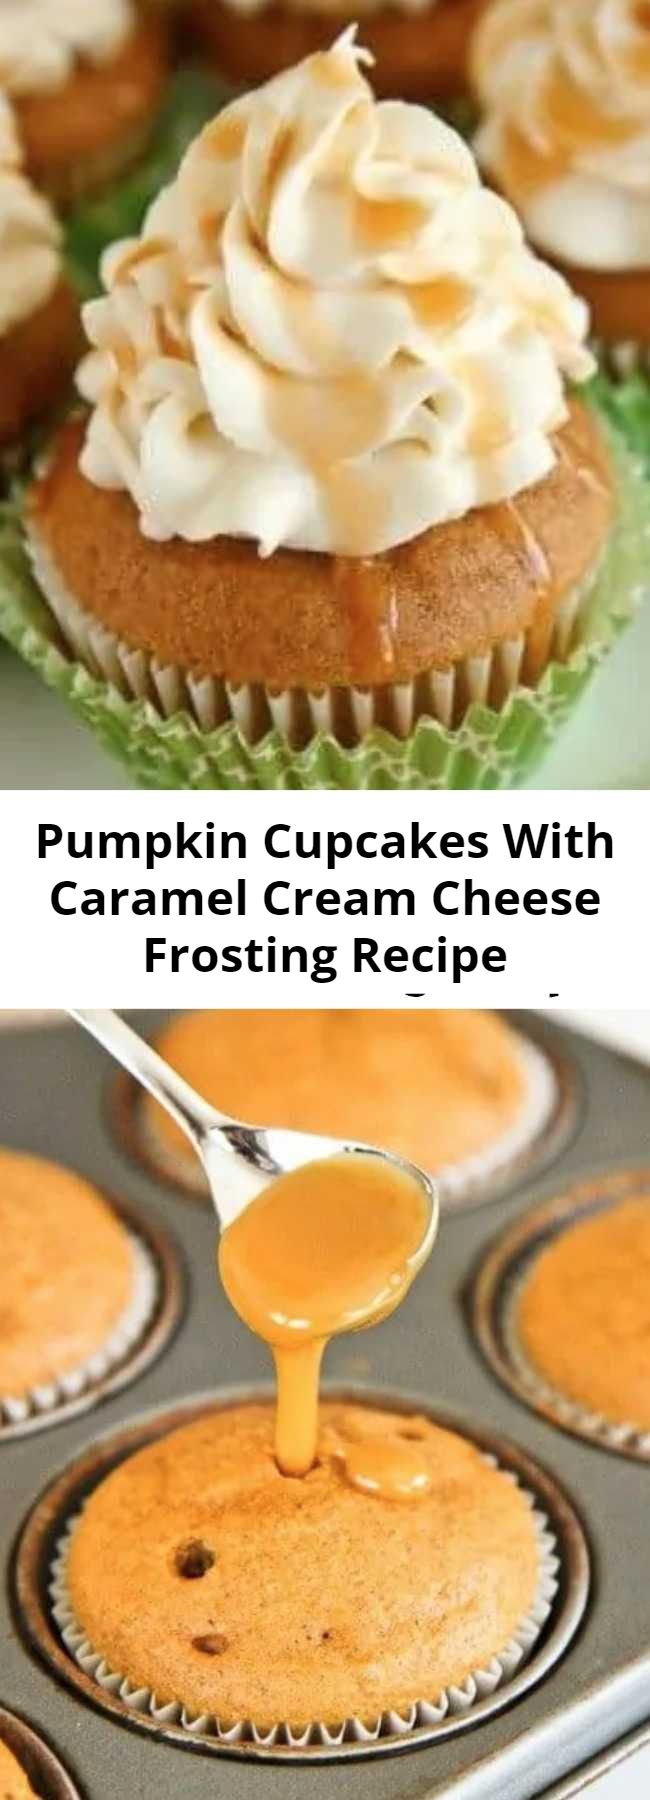 Easy Pumpkin Cupcakes With Caramel Cream Cheese Frosting Recipe - A delicious blend of pumpkin, caramel and cream cheese, these pumpkin cupcakes are a perfect fall dessert. If you love pumpkin, put these on your baking list. They are DELISH!